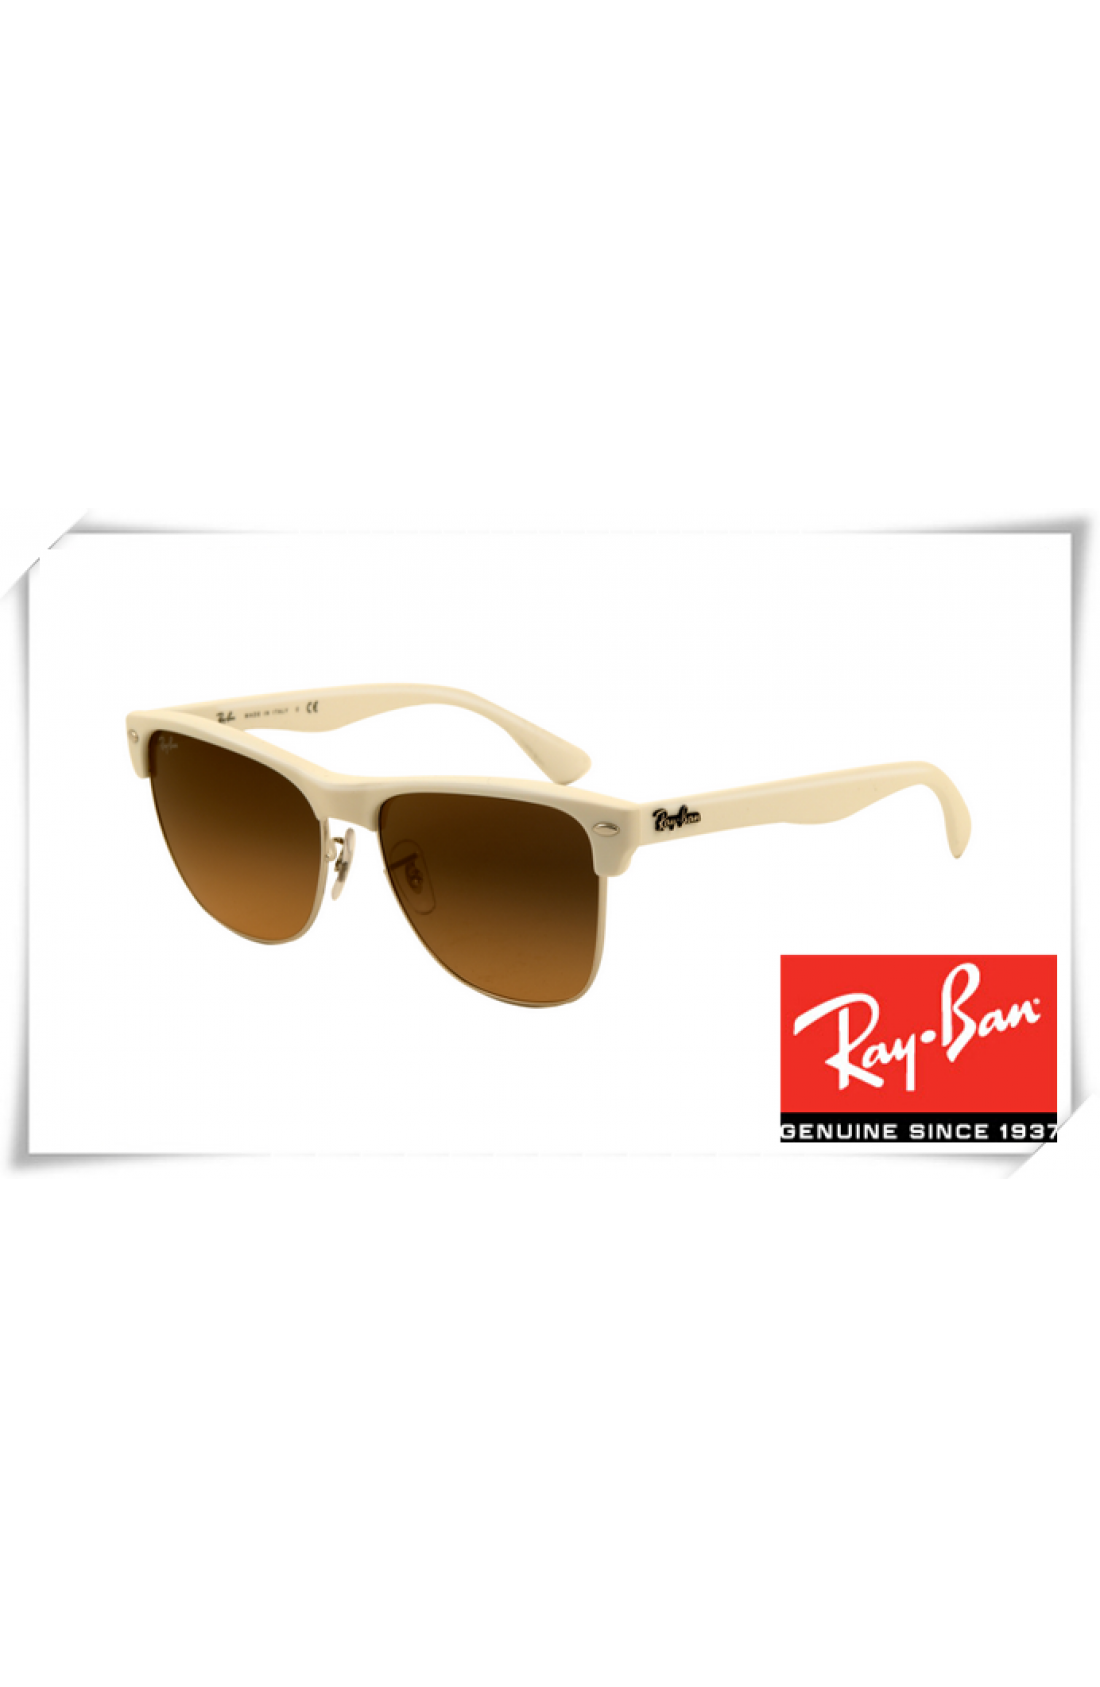 Replica Ray Ban Rb4175 Clubmaster Oversized Sunglasses Beige Frame Brown Lens Outlet